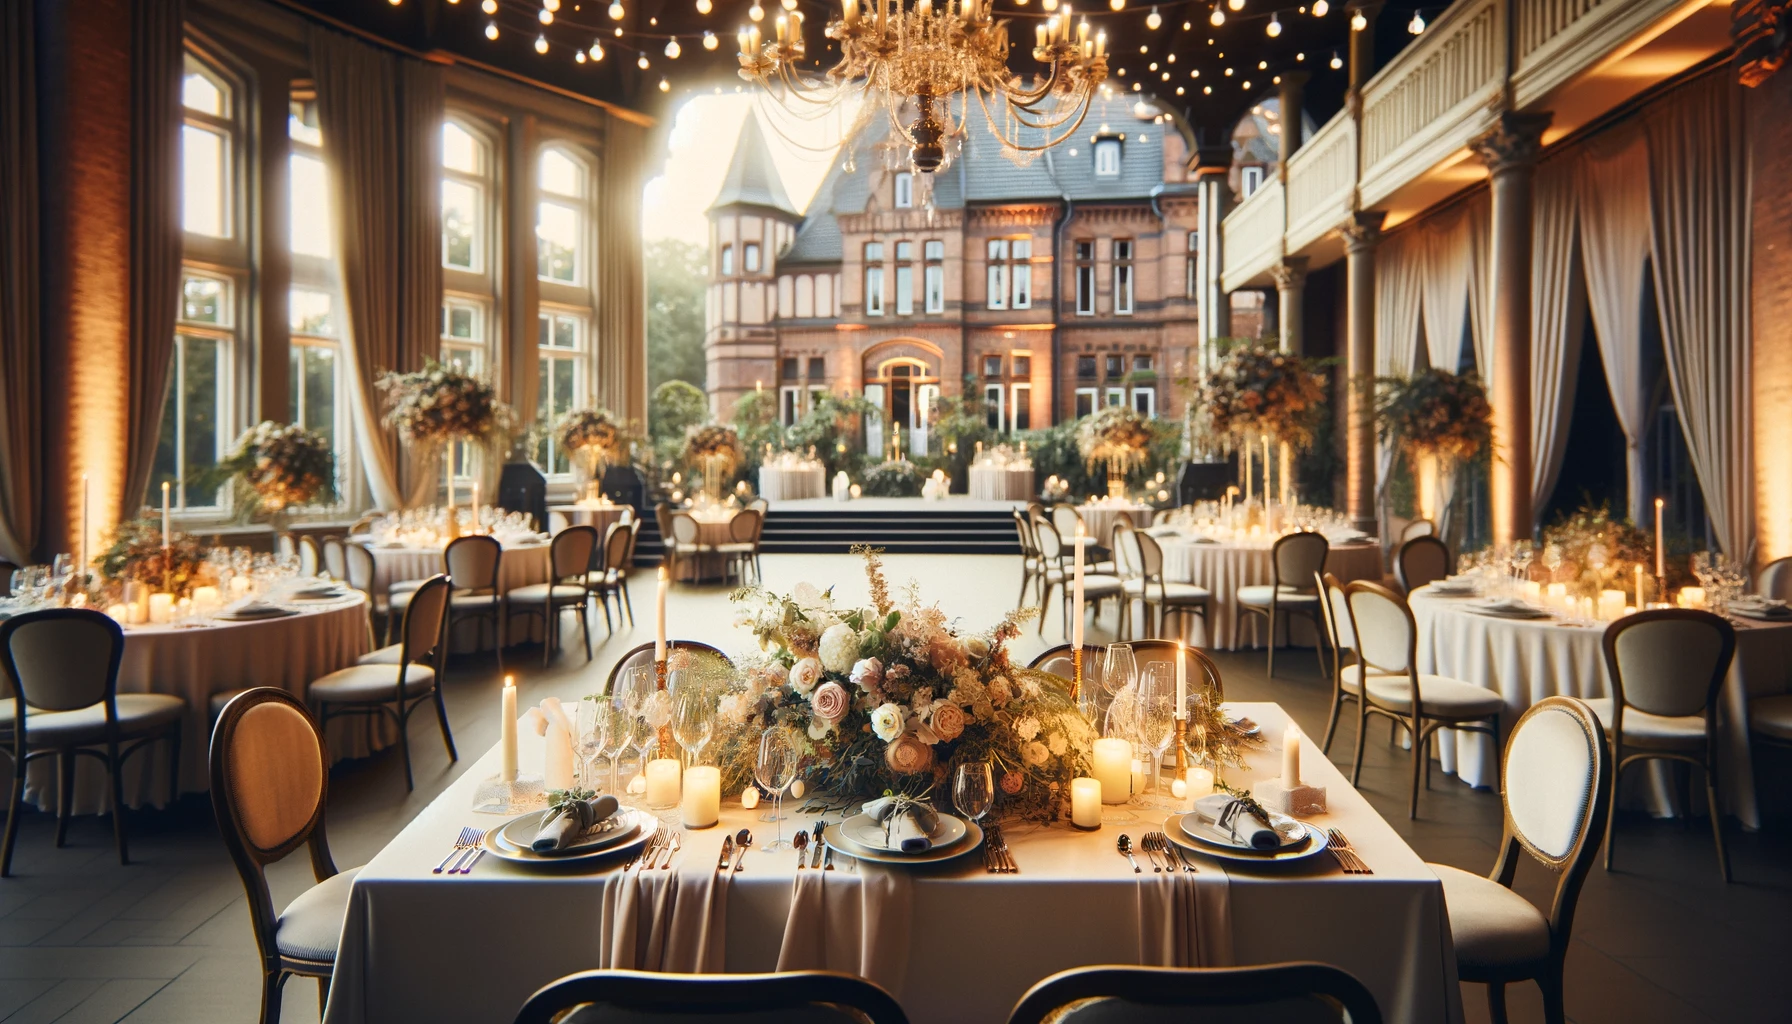 Elegant wedding table setup in a romantic venue in Dormagen, Germany, with floral decorations and ambient lighting, reflecting a serene and joyful wedding day atmosphere.